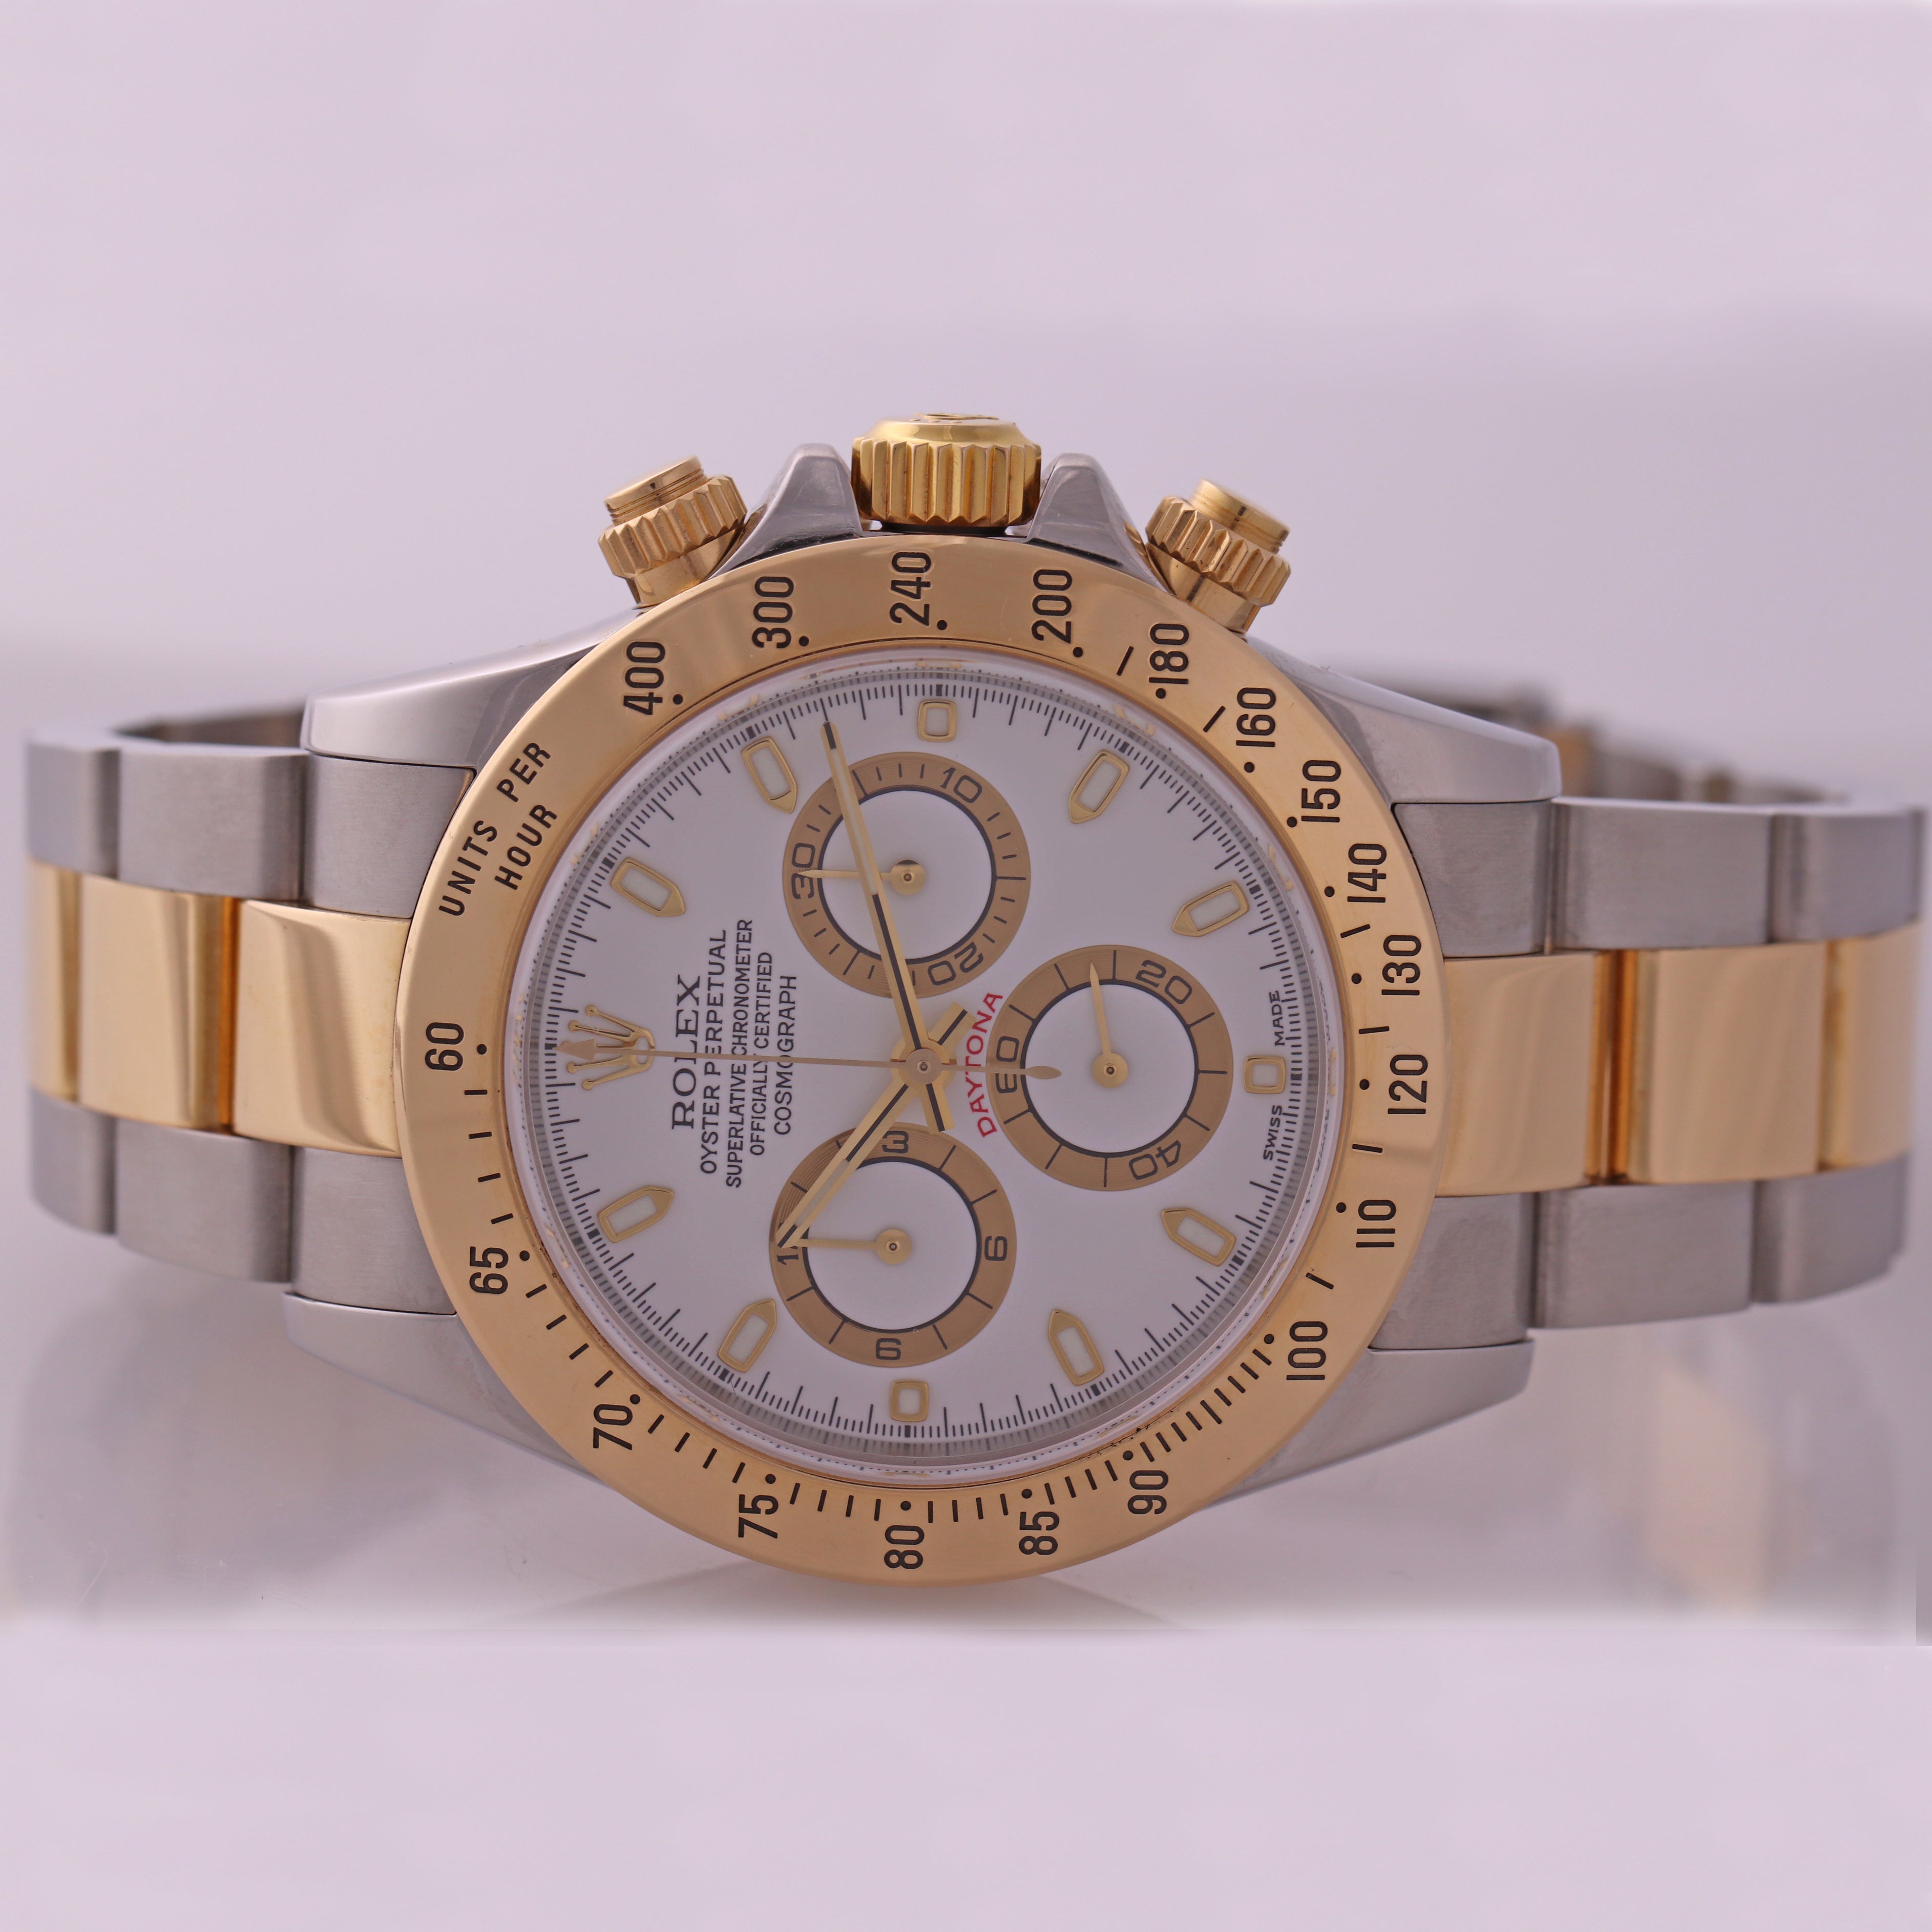 PAPERS Rolex Daytona Cosmograph 116523 White 18k Yellow Gold Steel TwoTone Watch N8